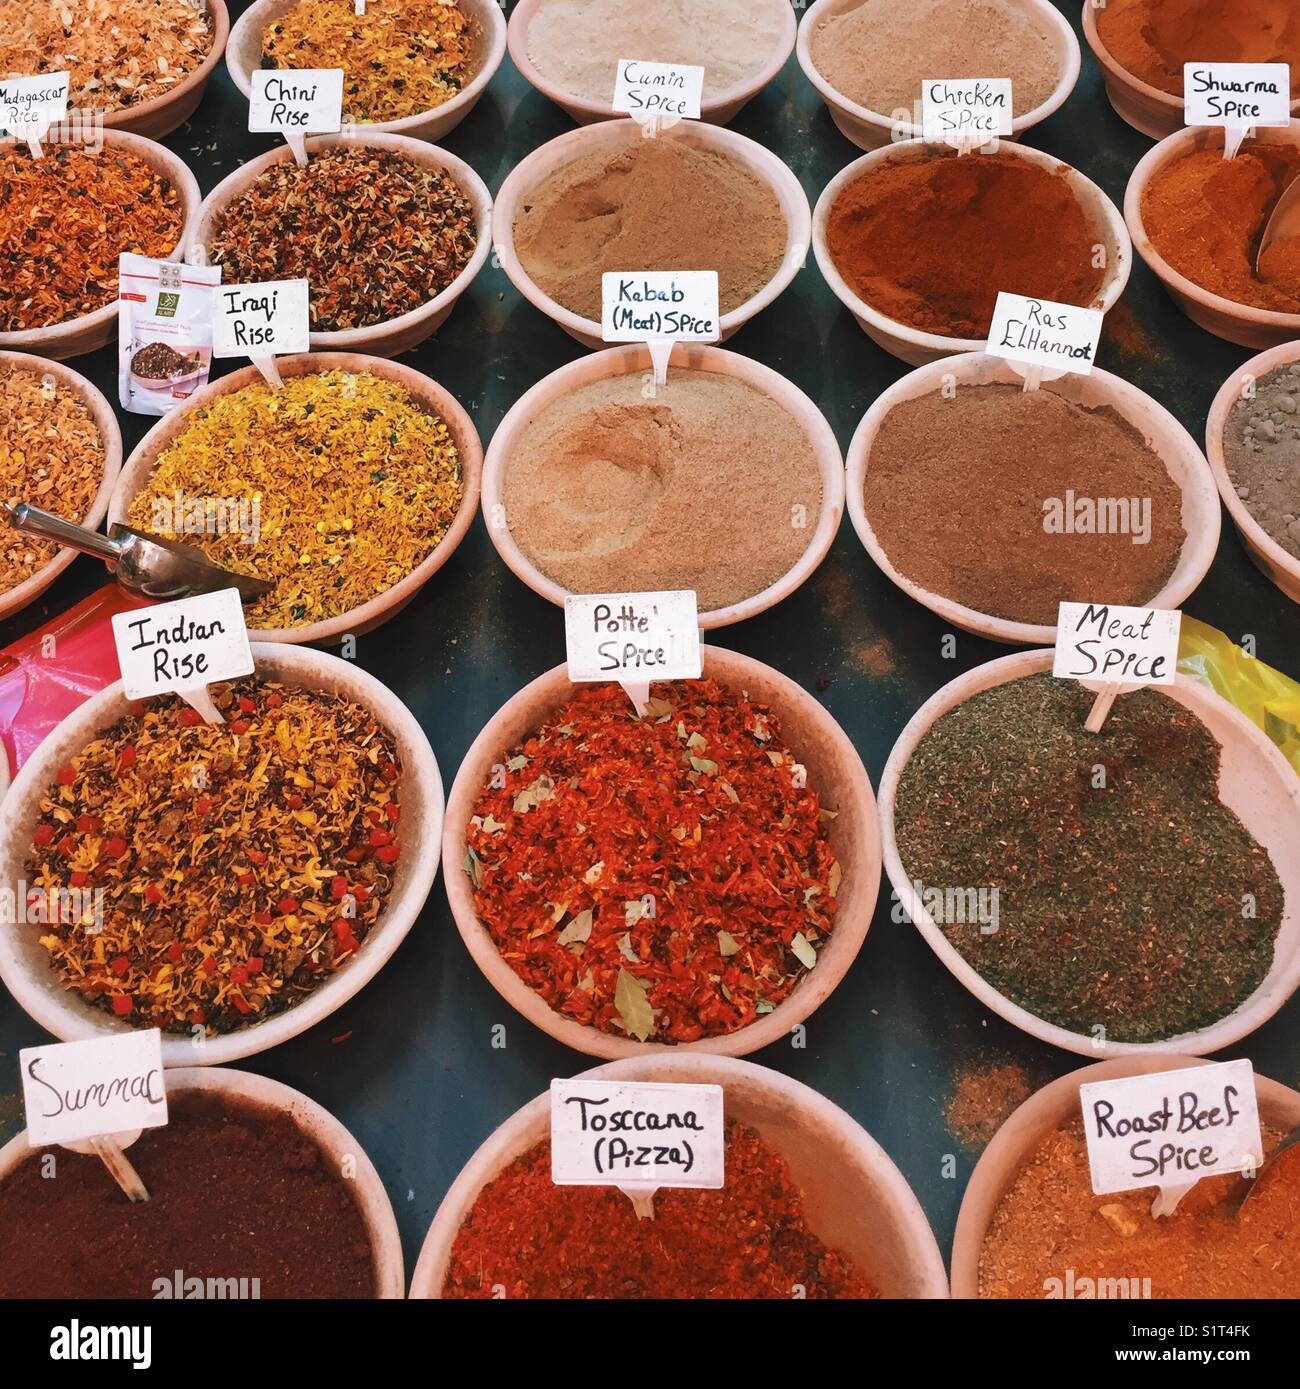 Middle Eastern Spices and Spice Blends This Healthy Table